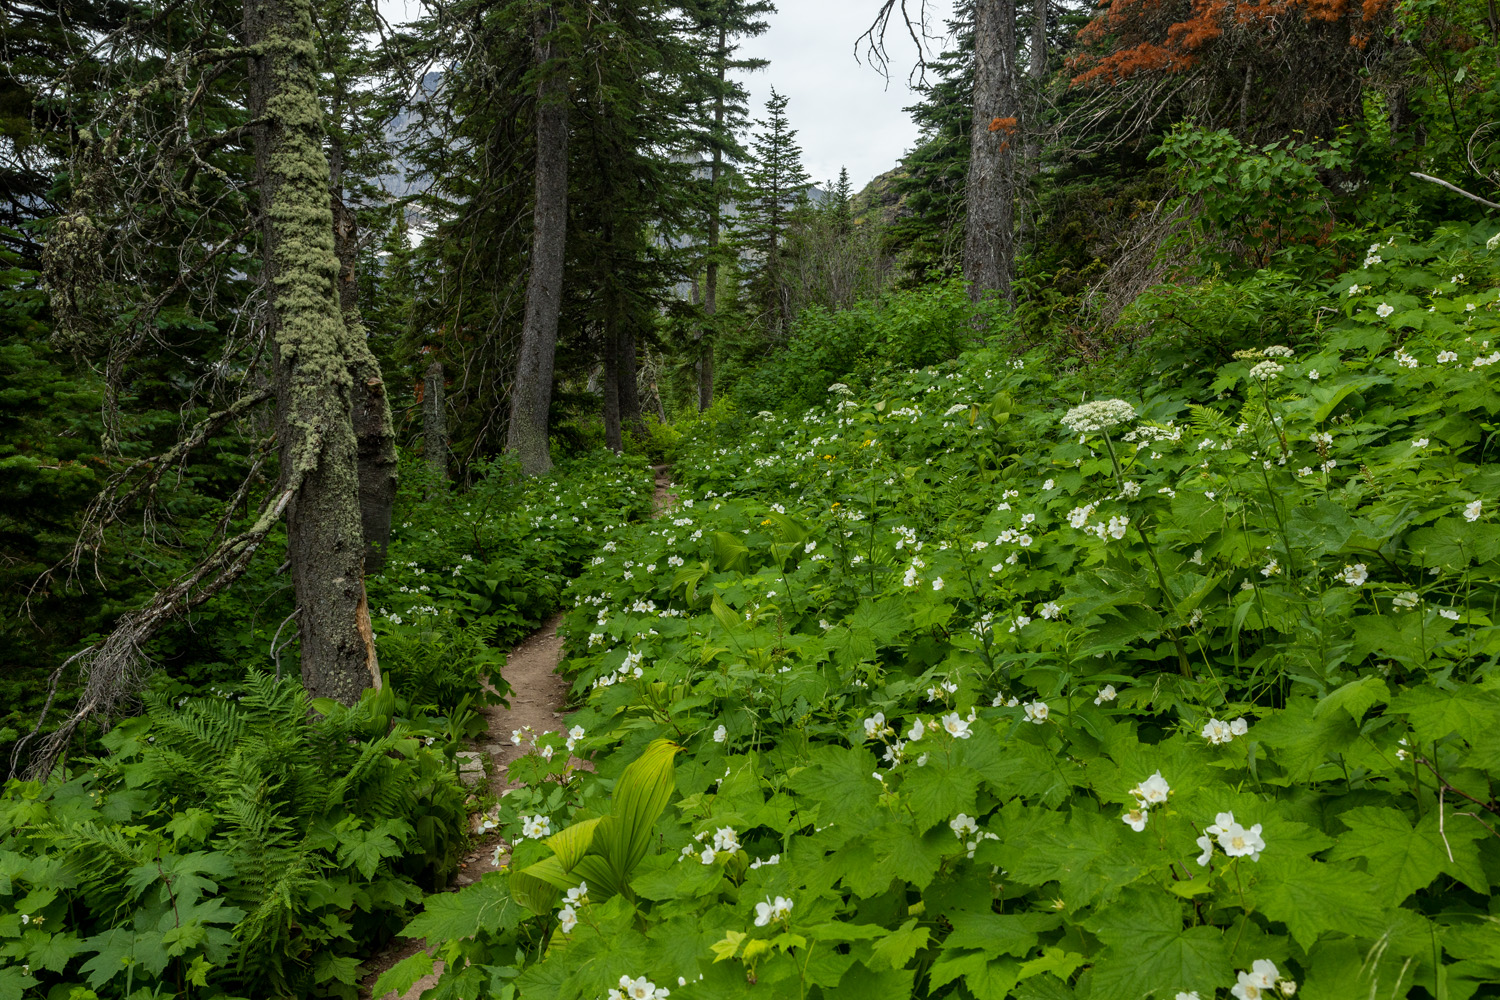 The trail to Grinnell Glacier passes through a thicket of thimbleberry.